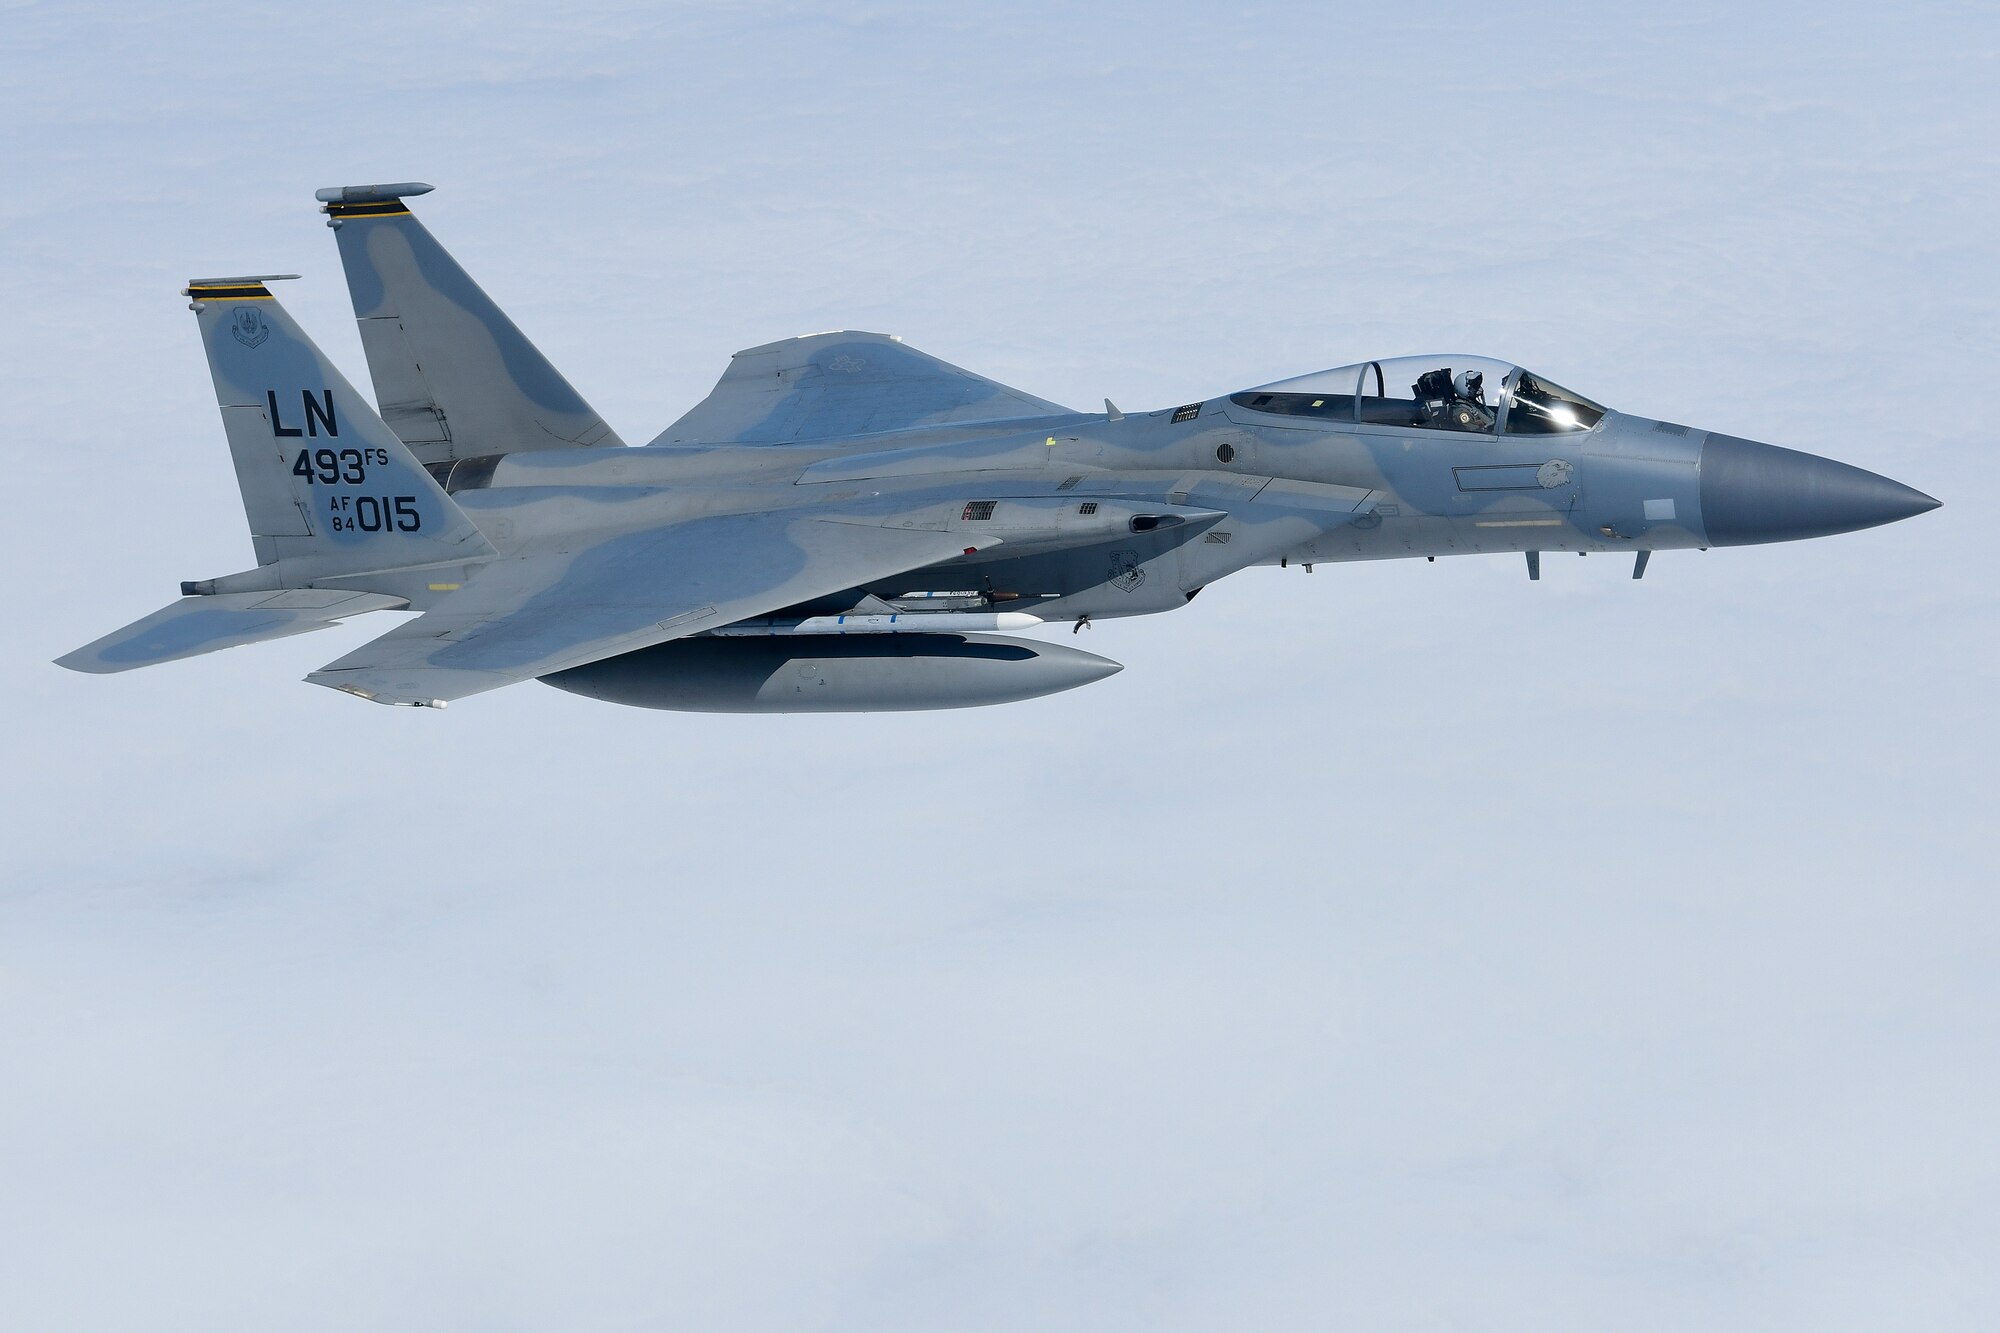 An F-15C Eagle assigned to the 493rd Fighter Squadron conducts aerial operations in support of exercise Pointblank 19-2, over the Nprth Sea, June 27, 2019. The objective of the exercise is to prepare coalition warfighters for a highly contested fight against near-peer adversaries by providing a multi-dimensional battle-space to conduct advanced training in support of US, UK and French national interests. (U.S. Air Force photo/ Tech. Sgt. Matthew Plew)